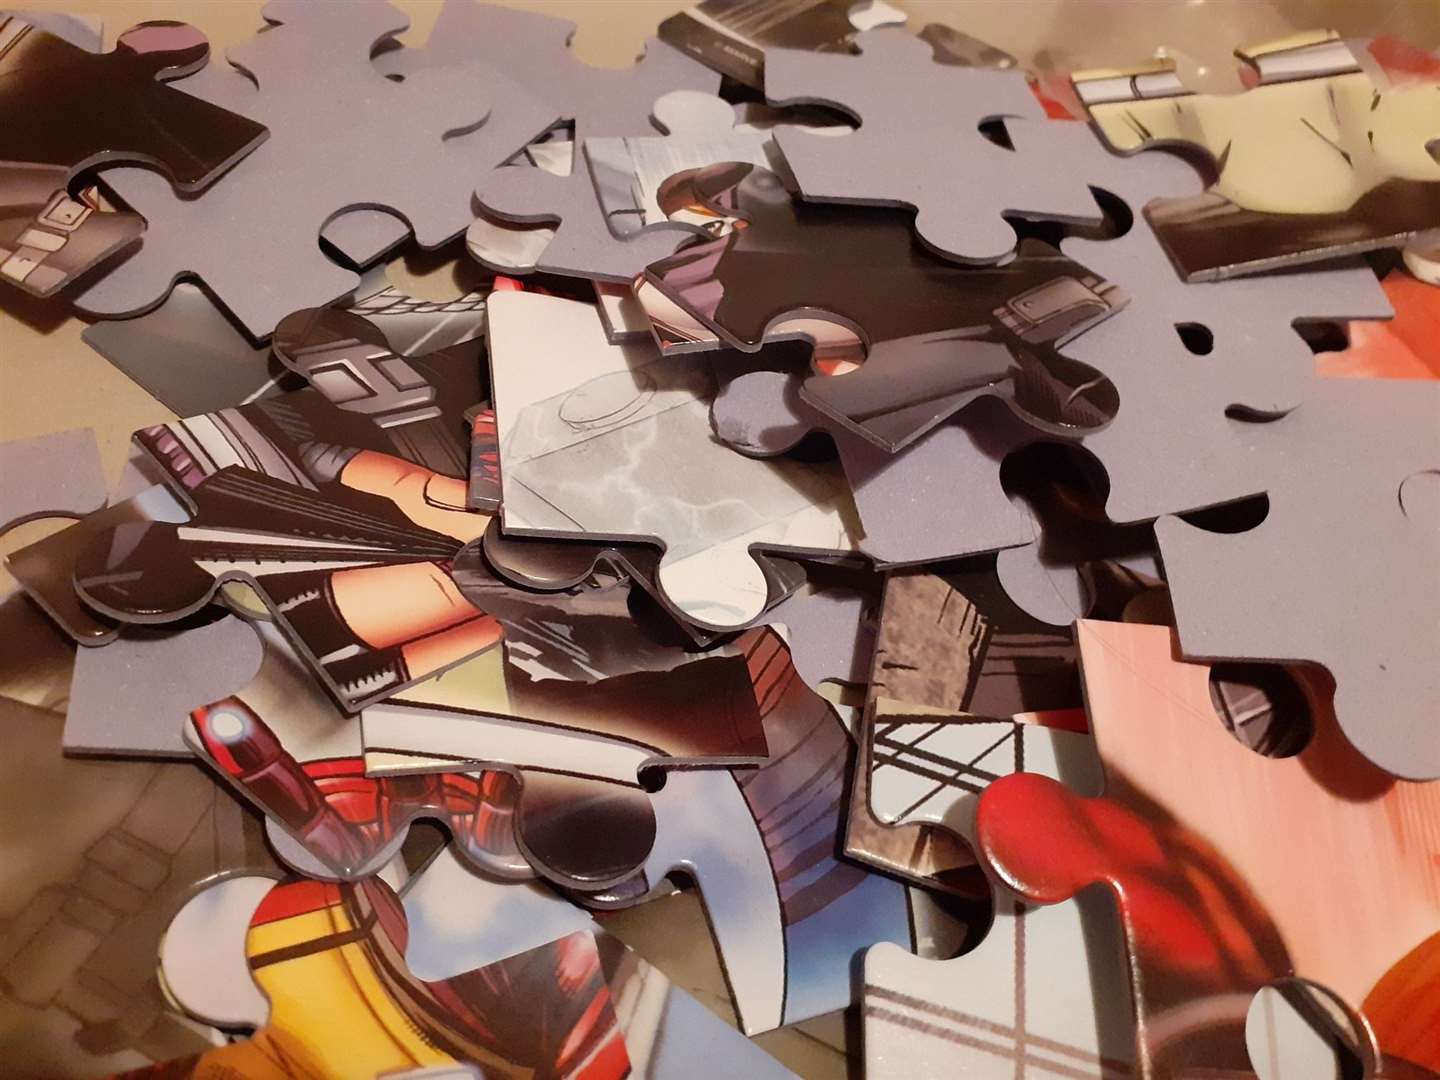 The hunt is on for unwanted jigsaws